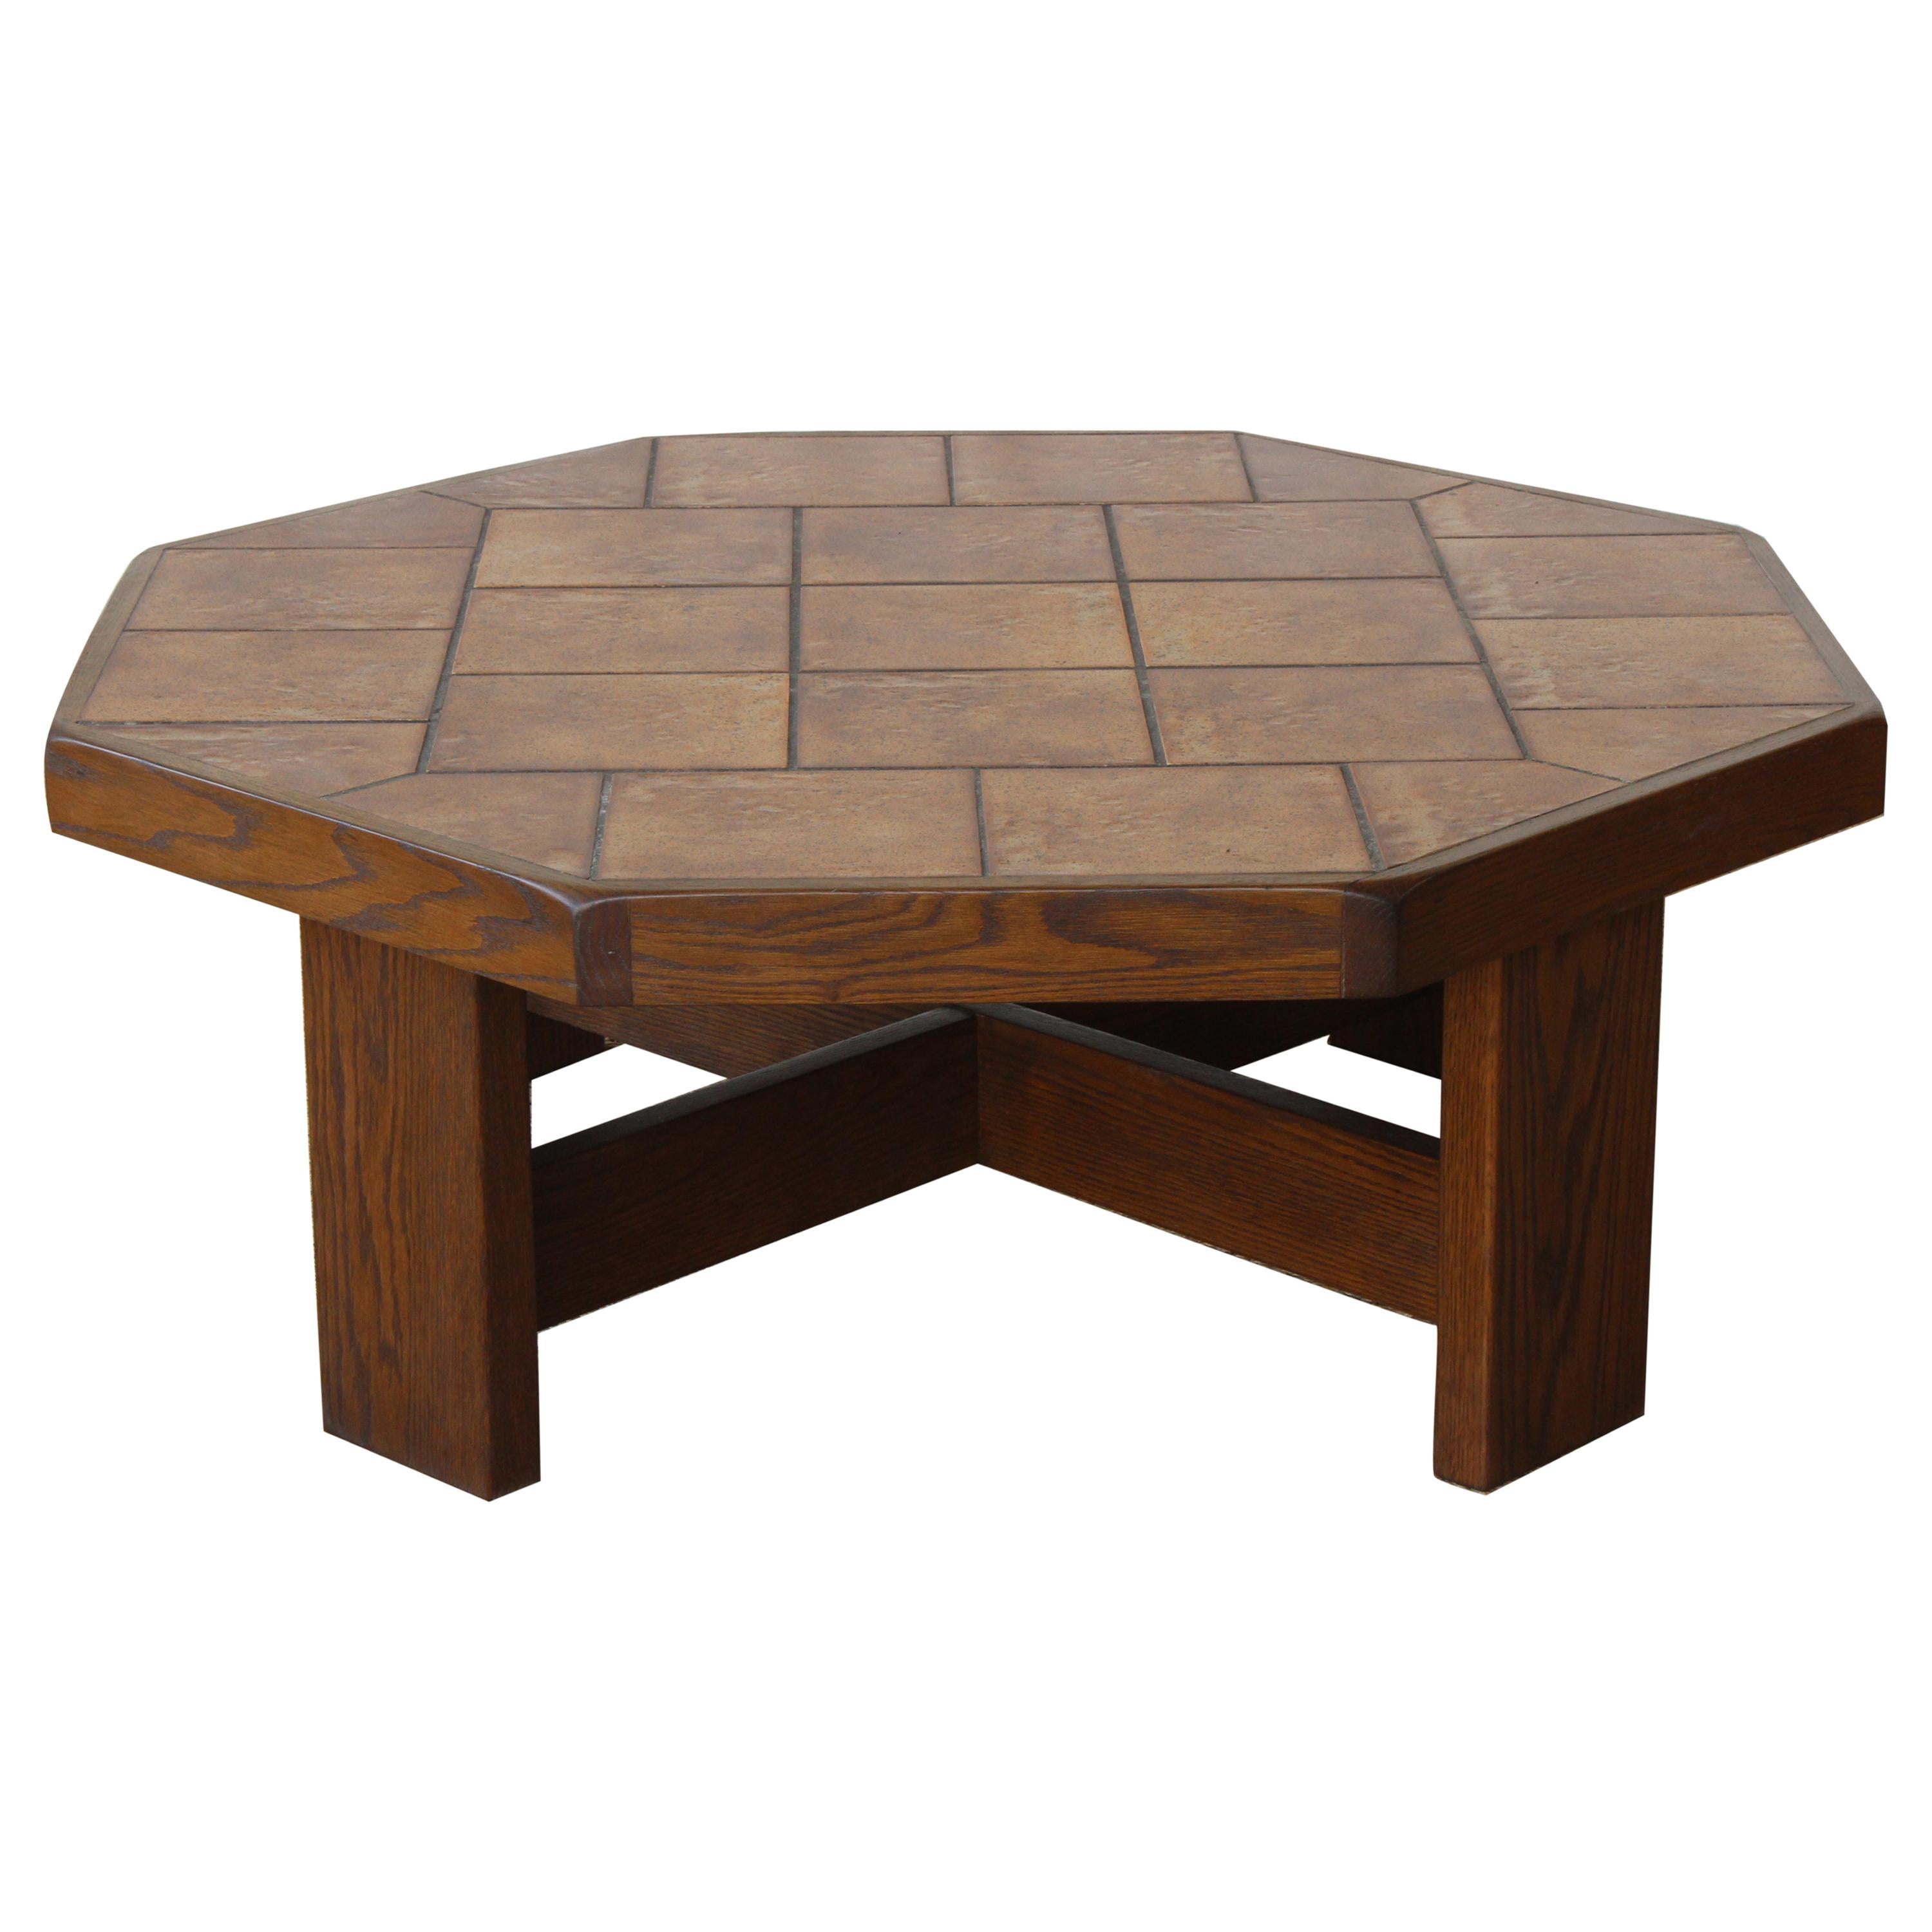 Oak and Ceramic Tile Coffee Table, France, 1970s